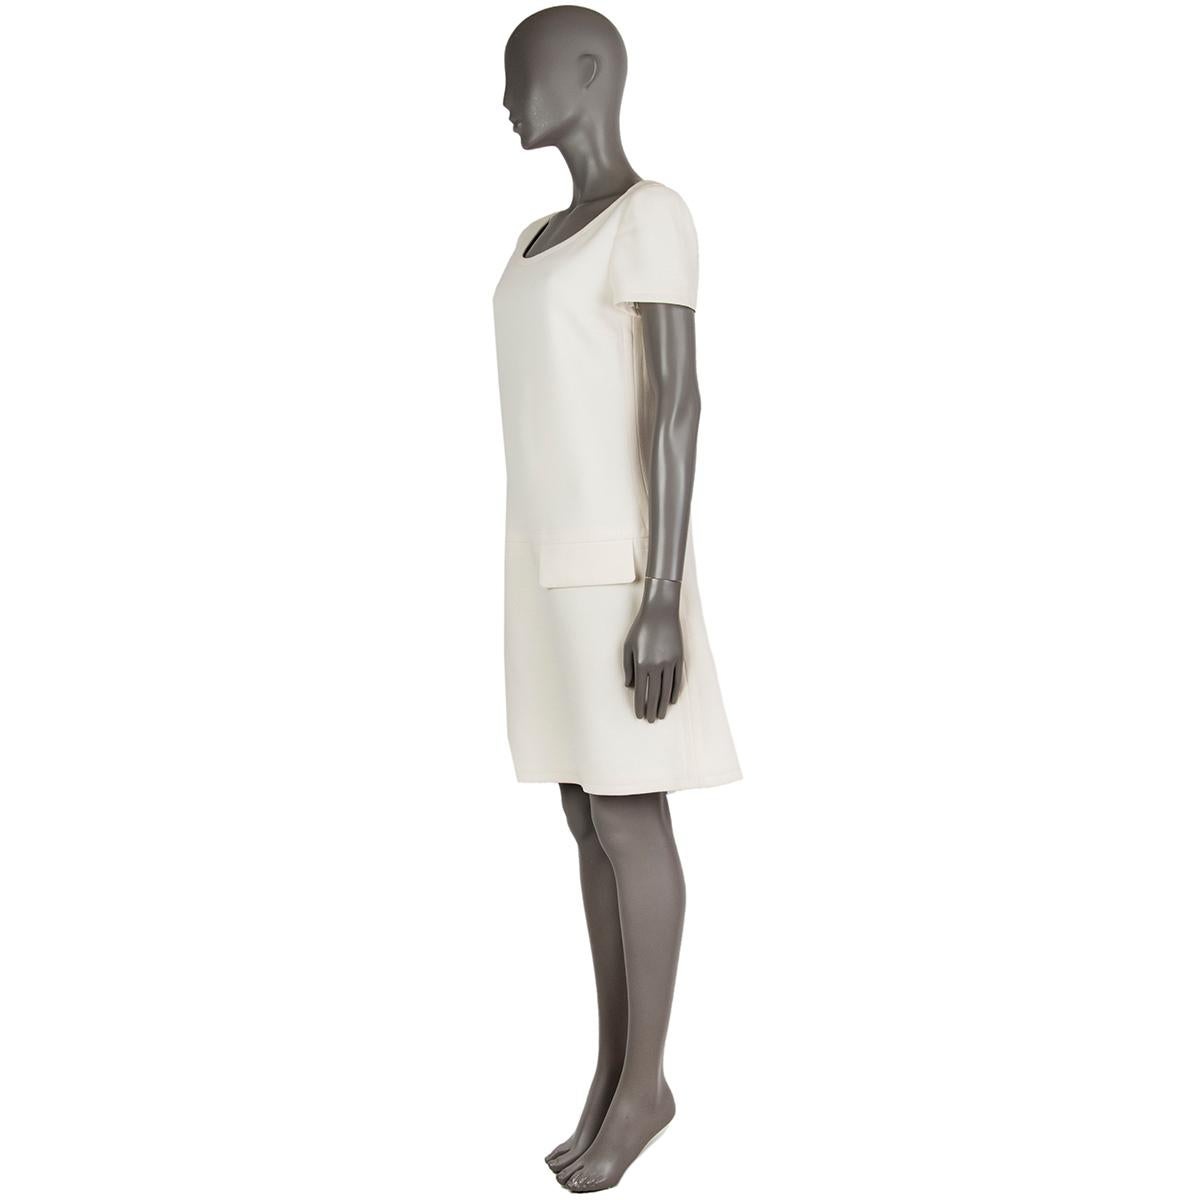 Prada shift dress in cream virgine wool (100%) with a drop-waist, boat neck, short sleeves and two flap pockets in the front. Lined in cream fabric viscose (66%) silk (34%). Has been worn and is in excellent condition

Tag Size 44
Size L
Shoulder